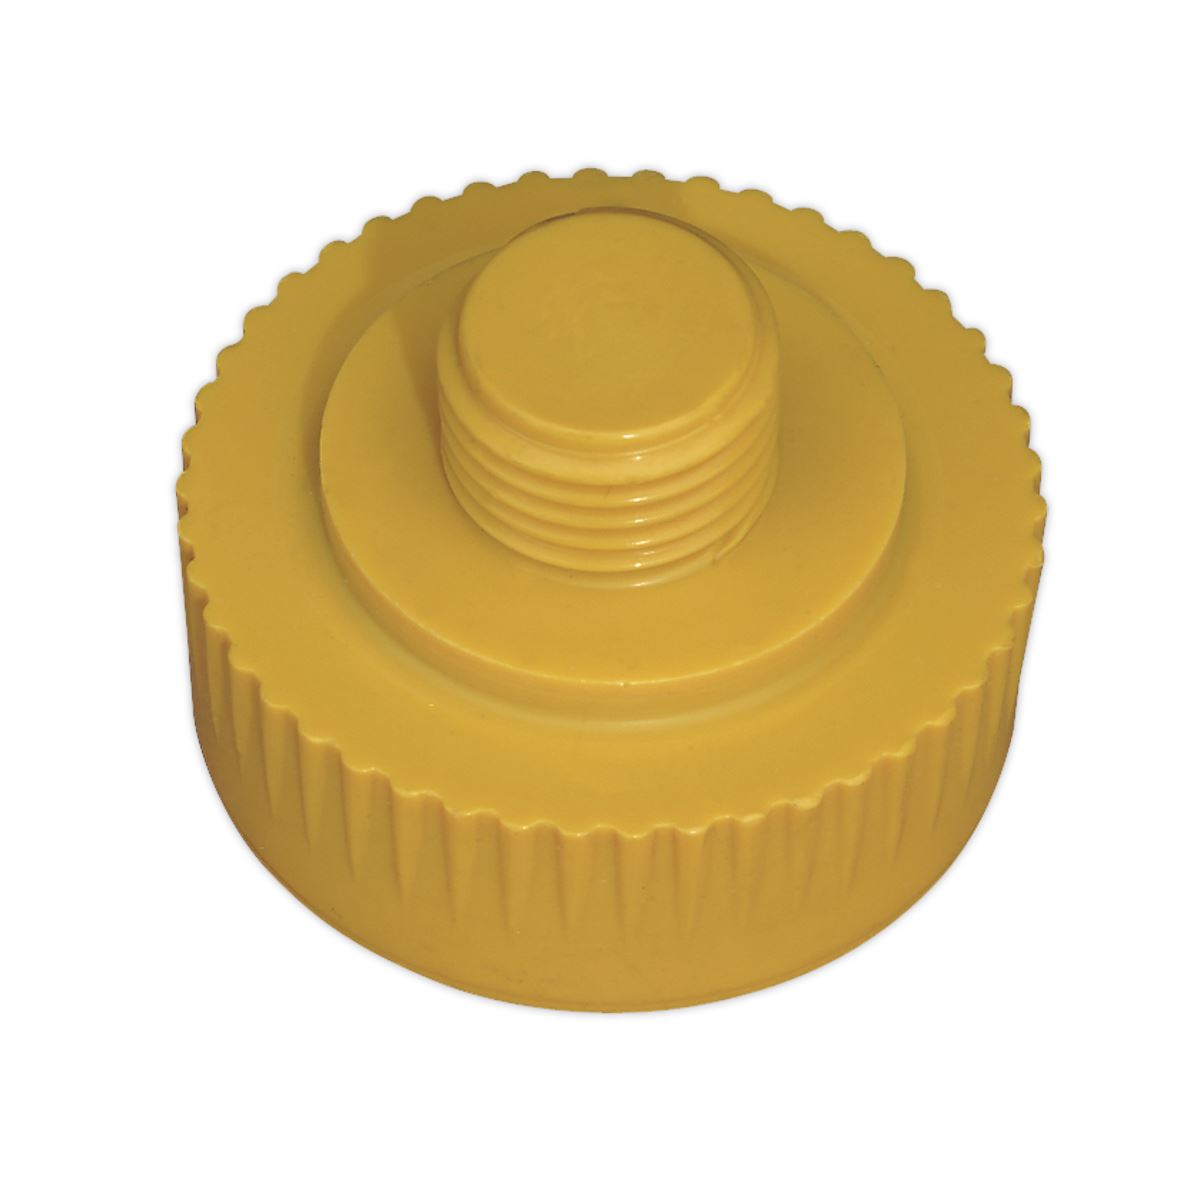 Sealey Premier Nylon Hammer Face, Extra Hard/Yellow for NFH15